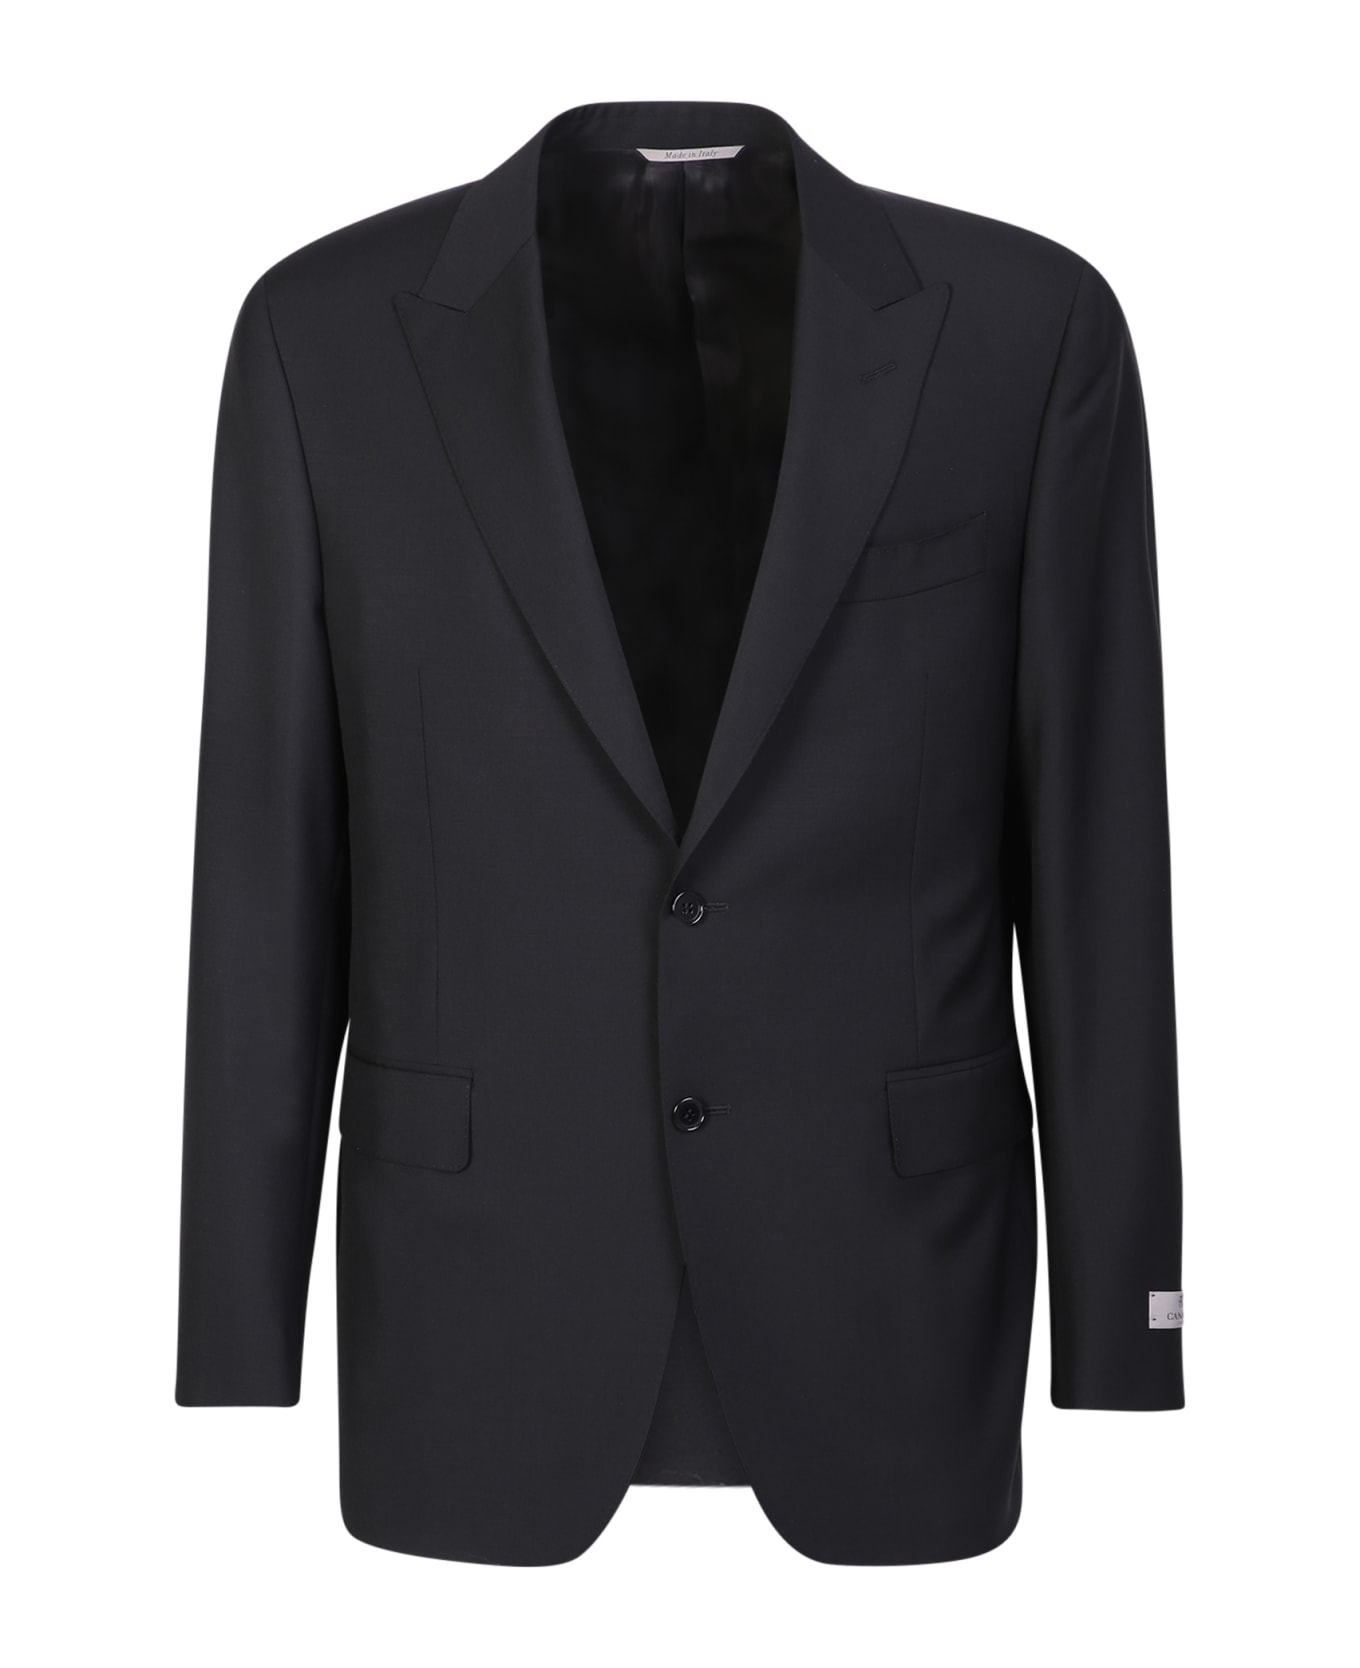 Canali Black Single-breasted Suit - Black スーツ